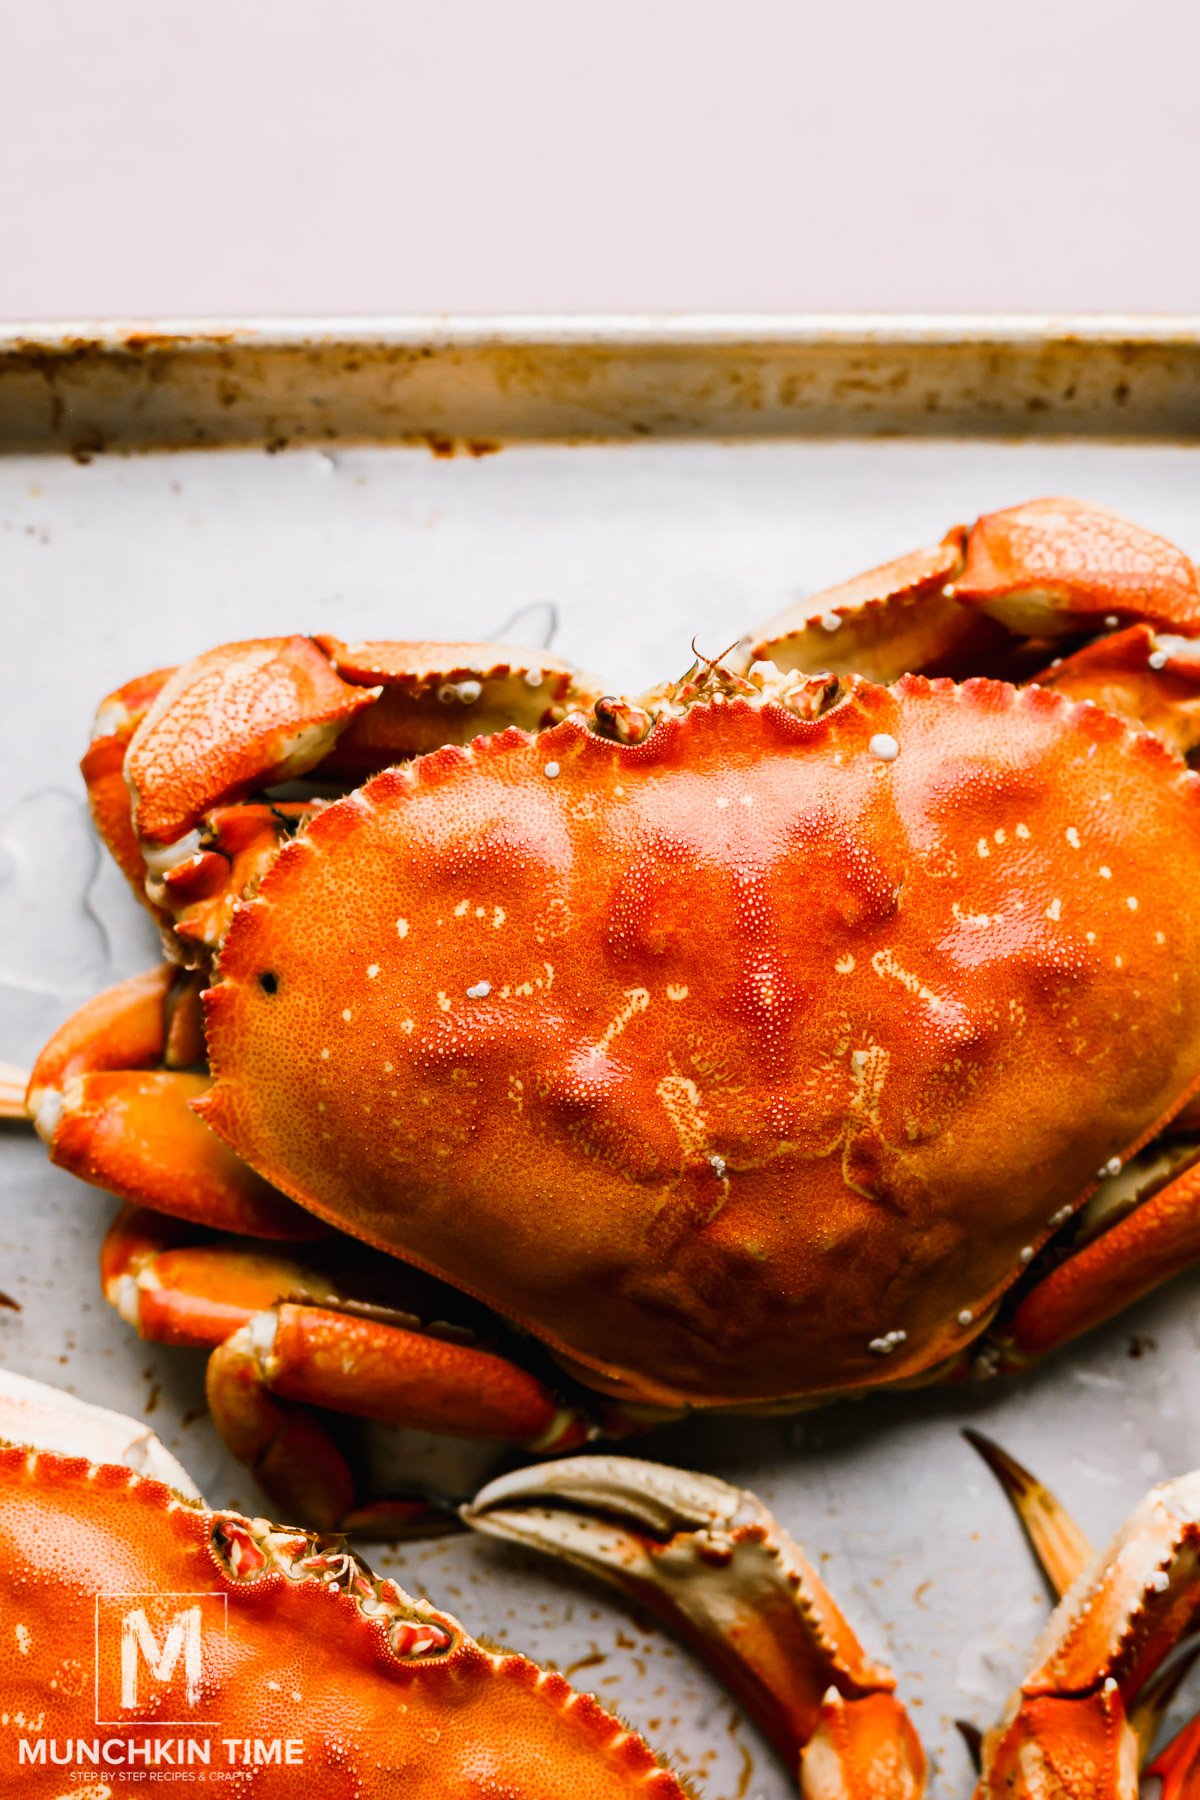 How to clean Dungeness crab at home.